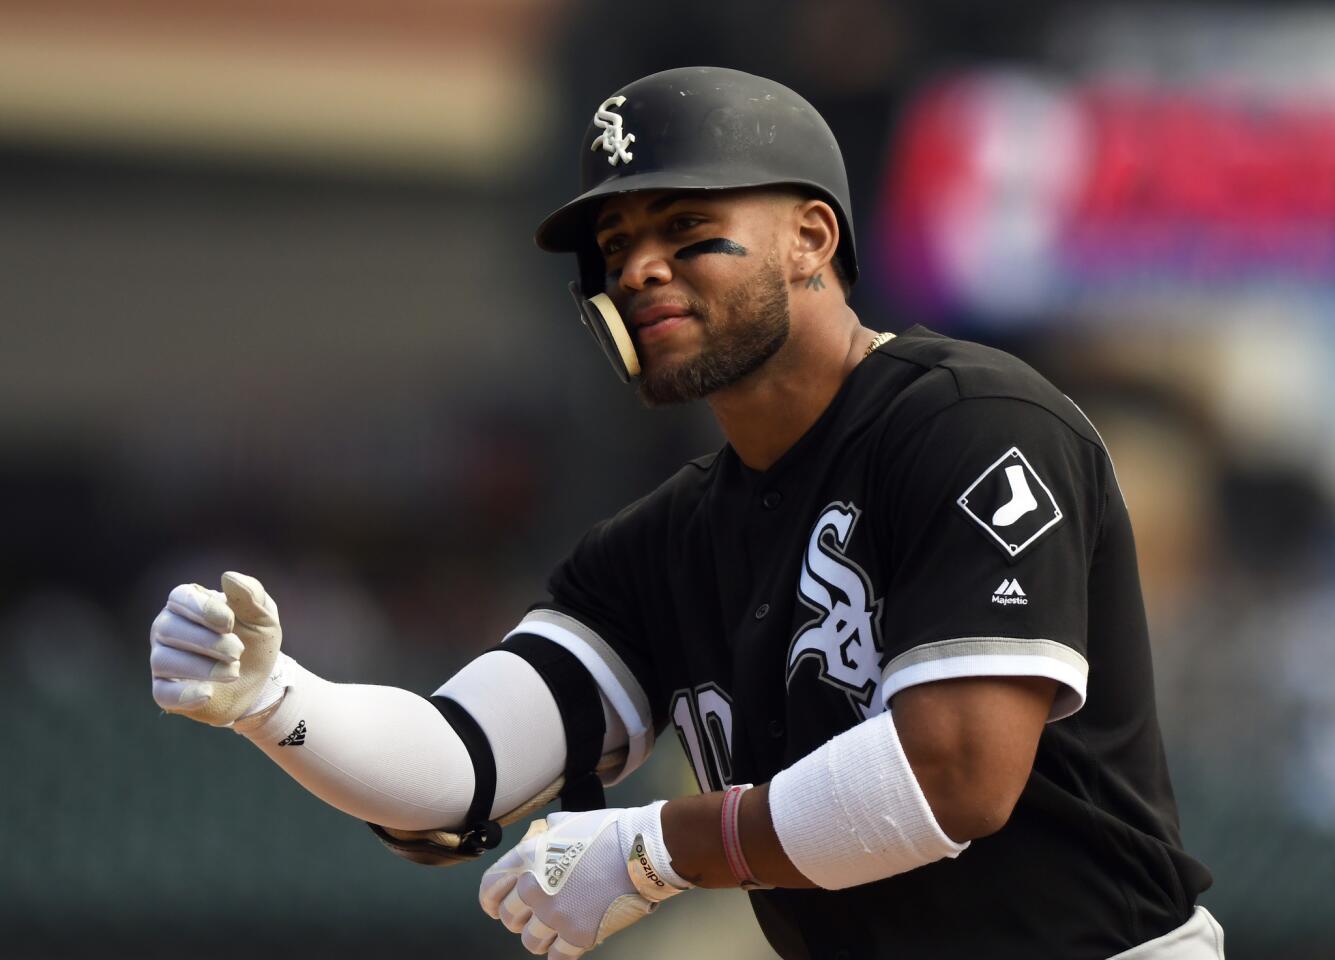 Yoan Moncada reacts after hitting a single against the Tigers on Thursday, Sept. 14, 2017, in Detroit.